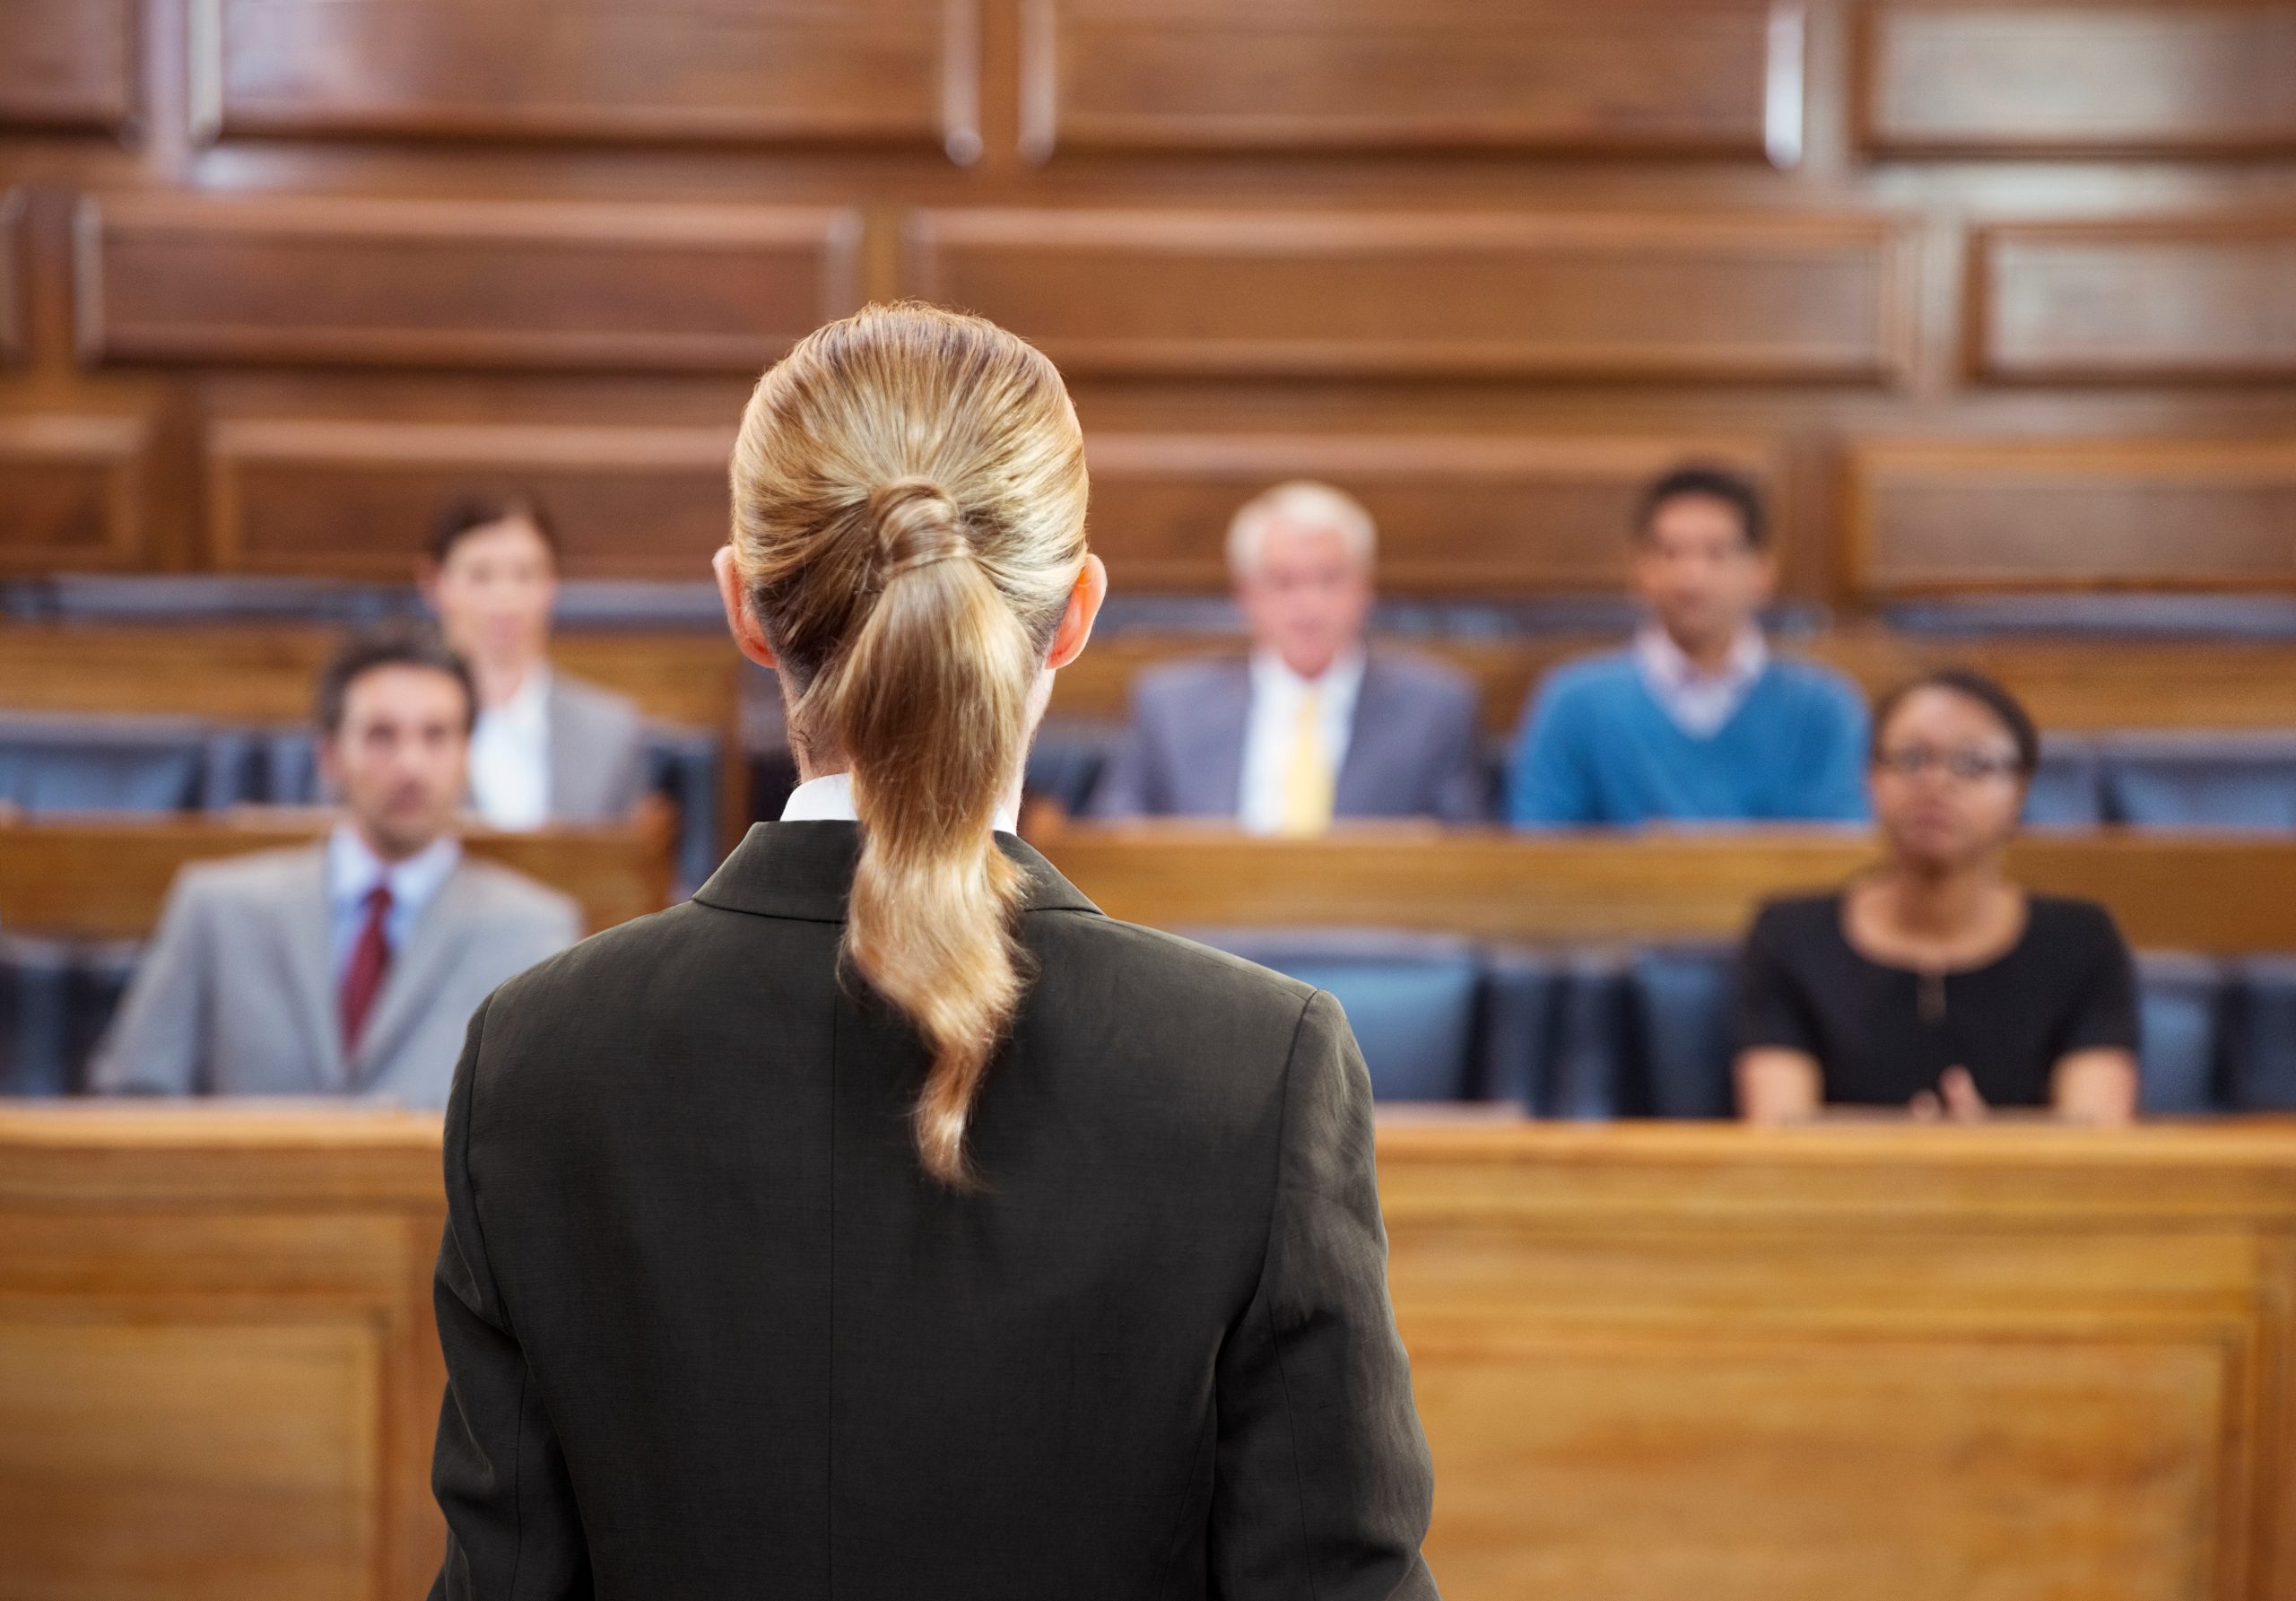 A court room scene - we see the back of a lawyer's head as she is turned to address the jury.